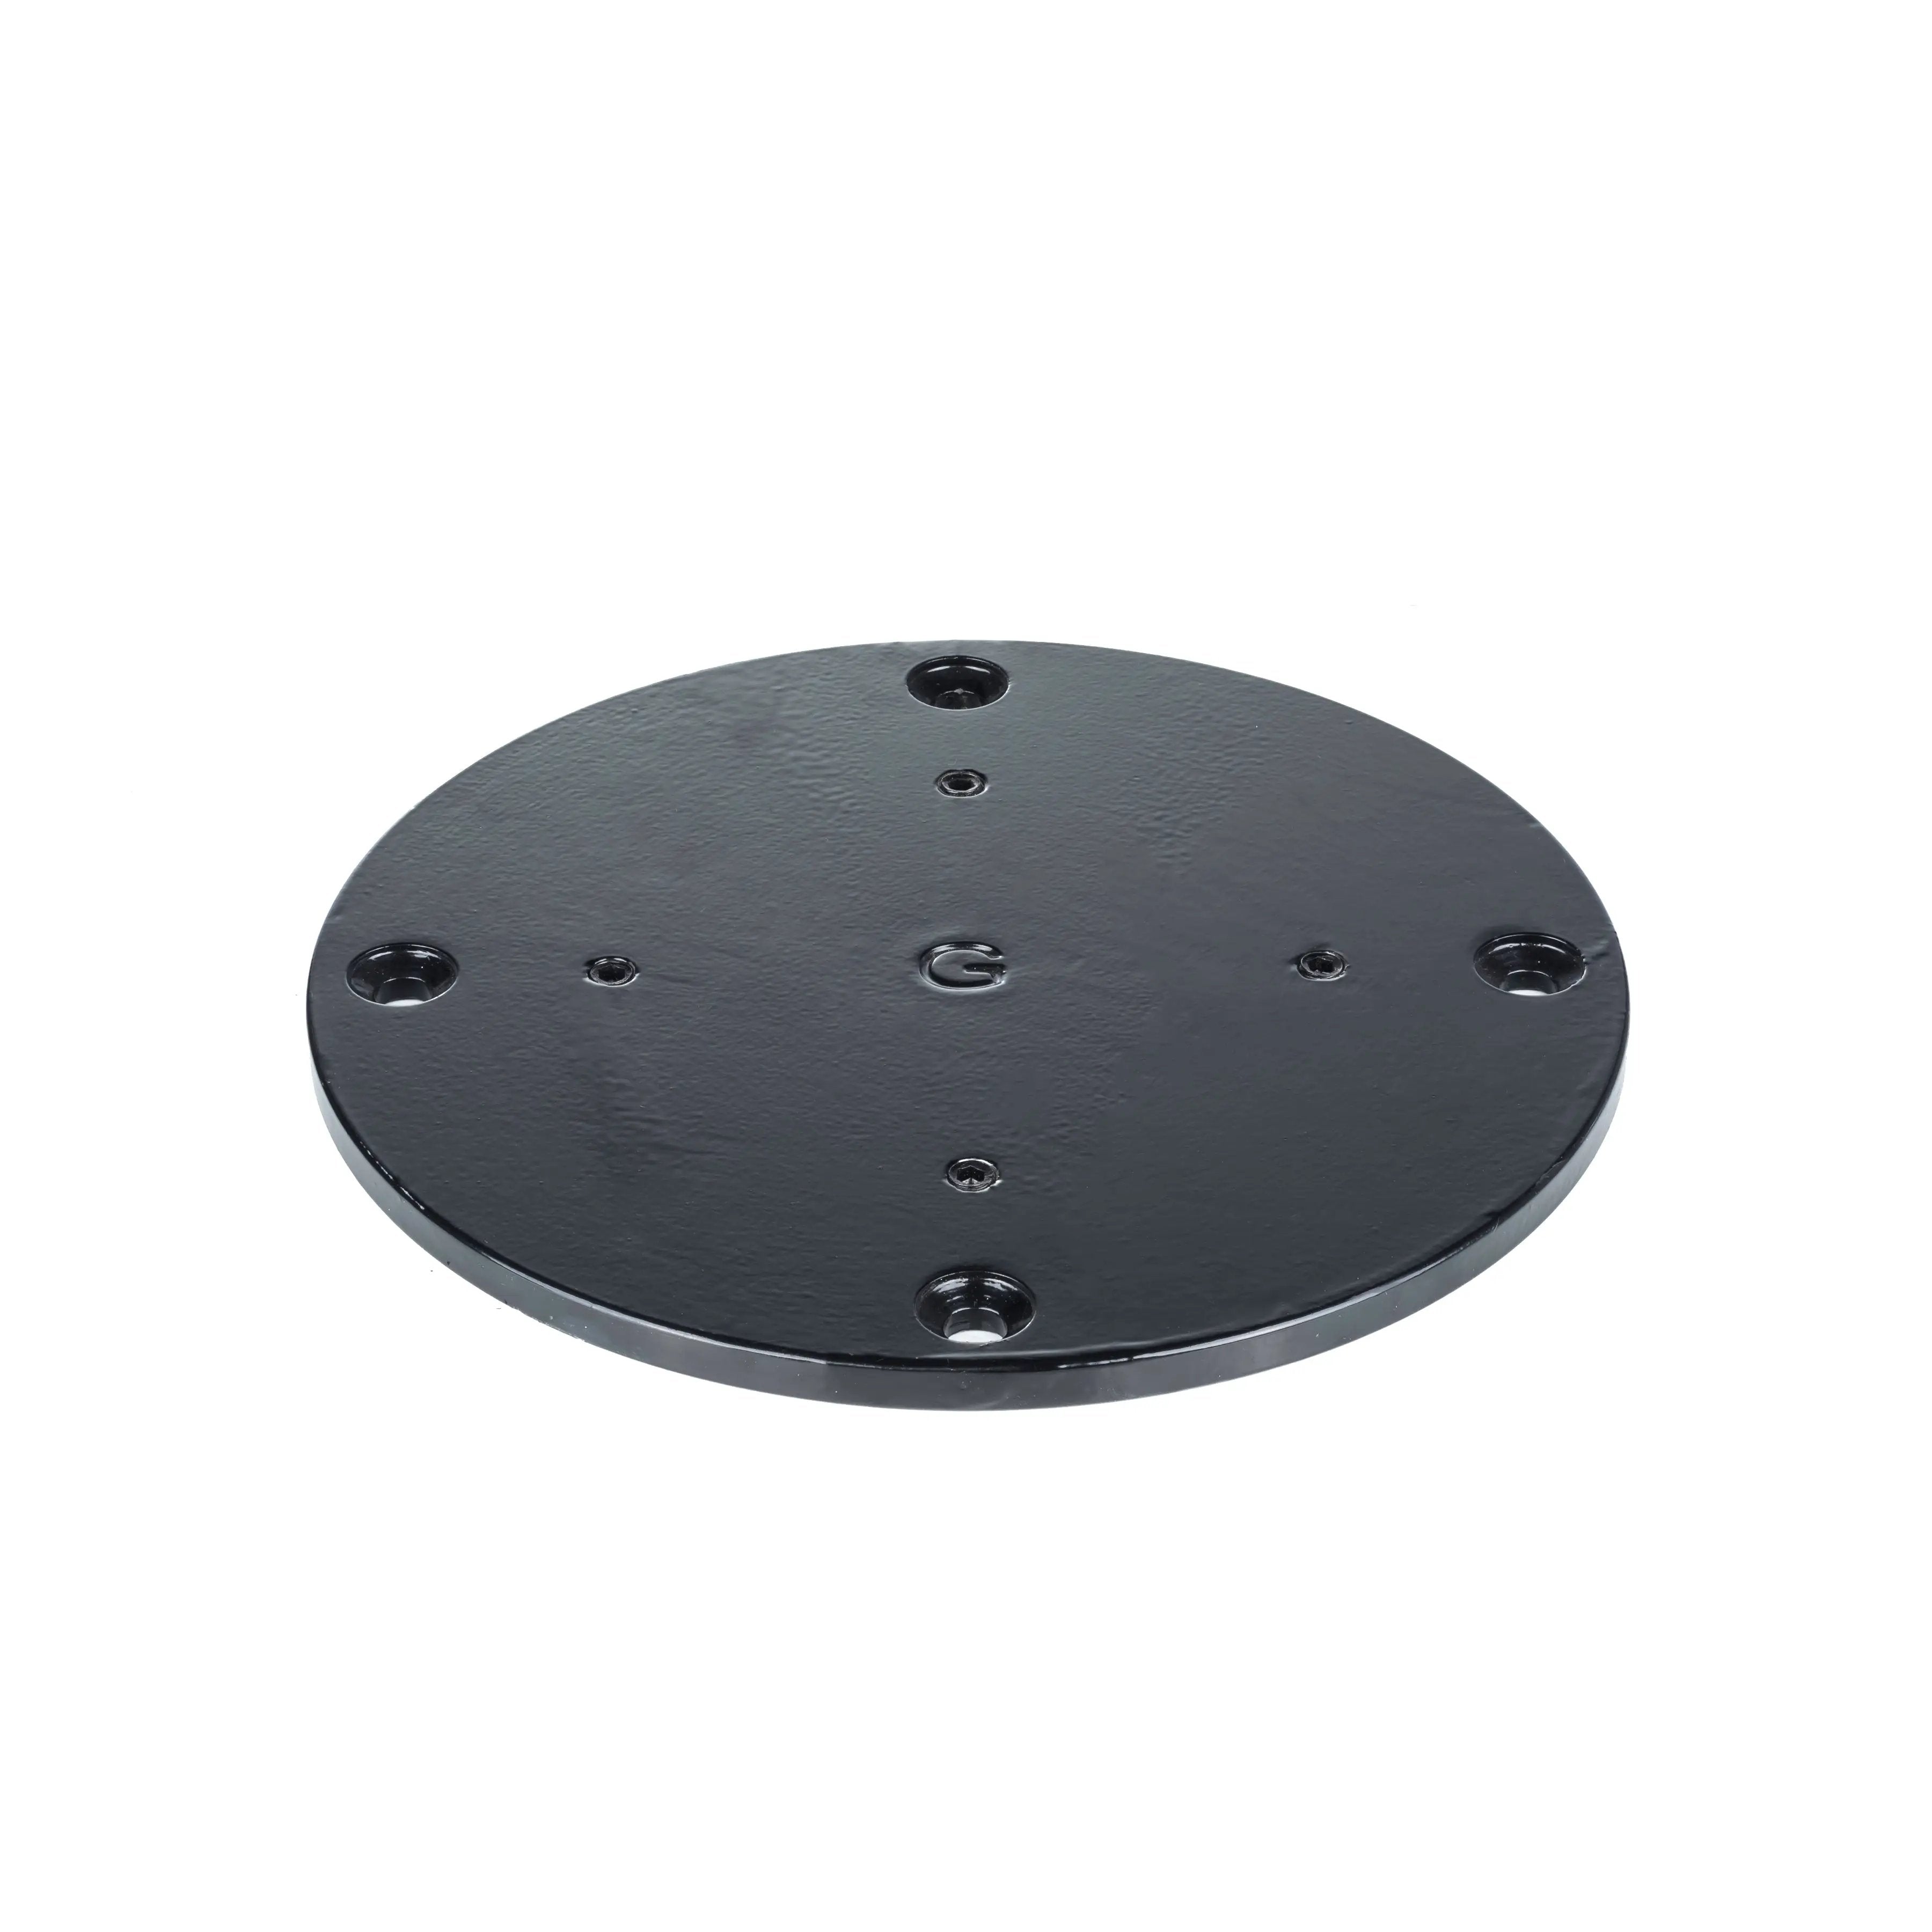 Direct Surface Mounting Plate by Frankford Umbrella